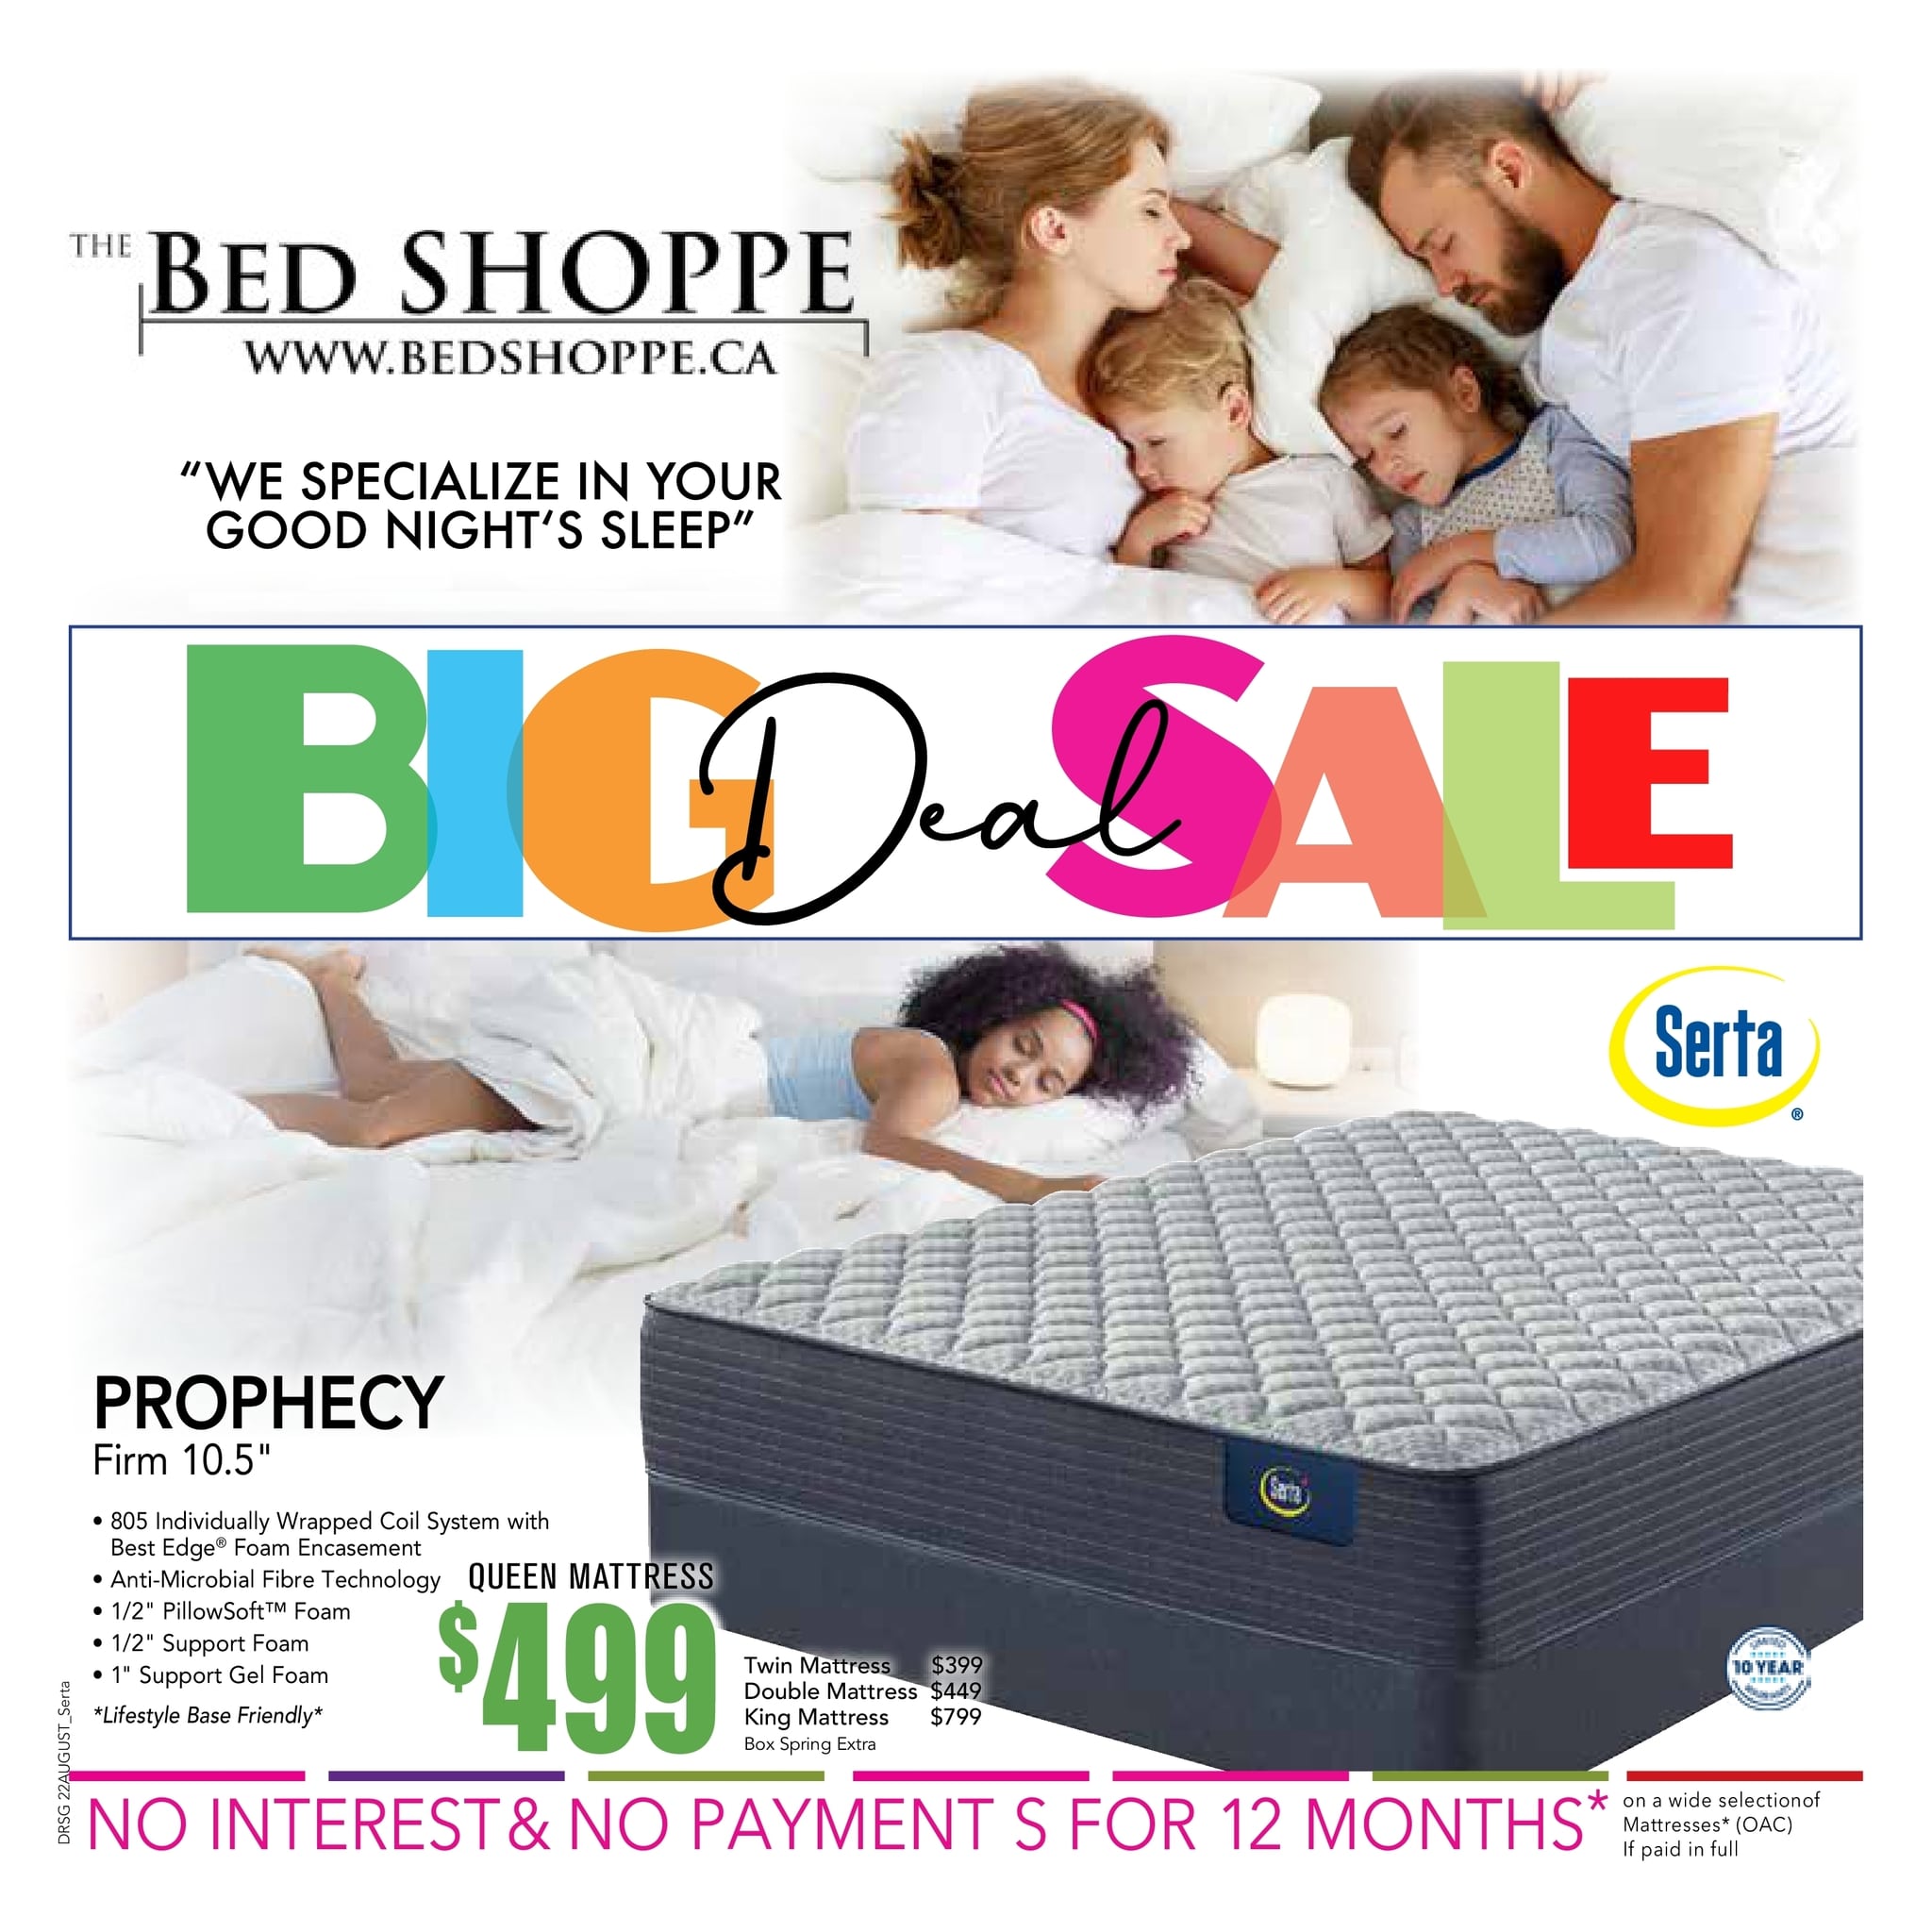 The Bed Shoppe - Monthly Specials